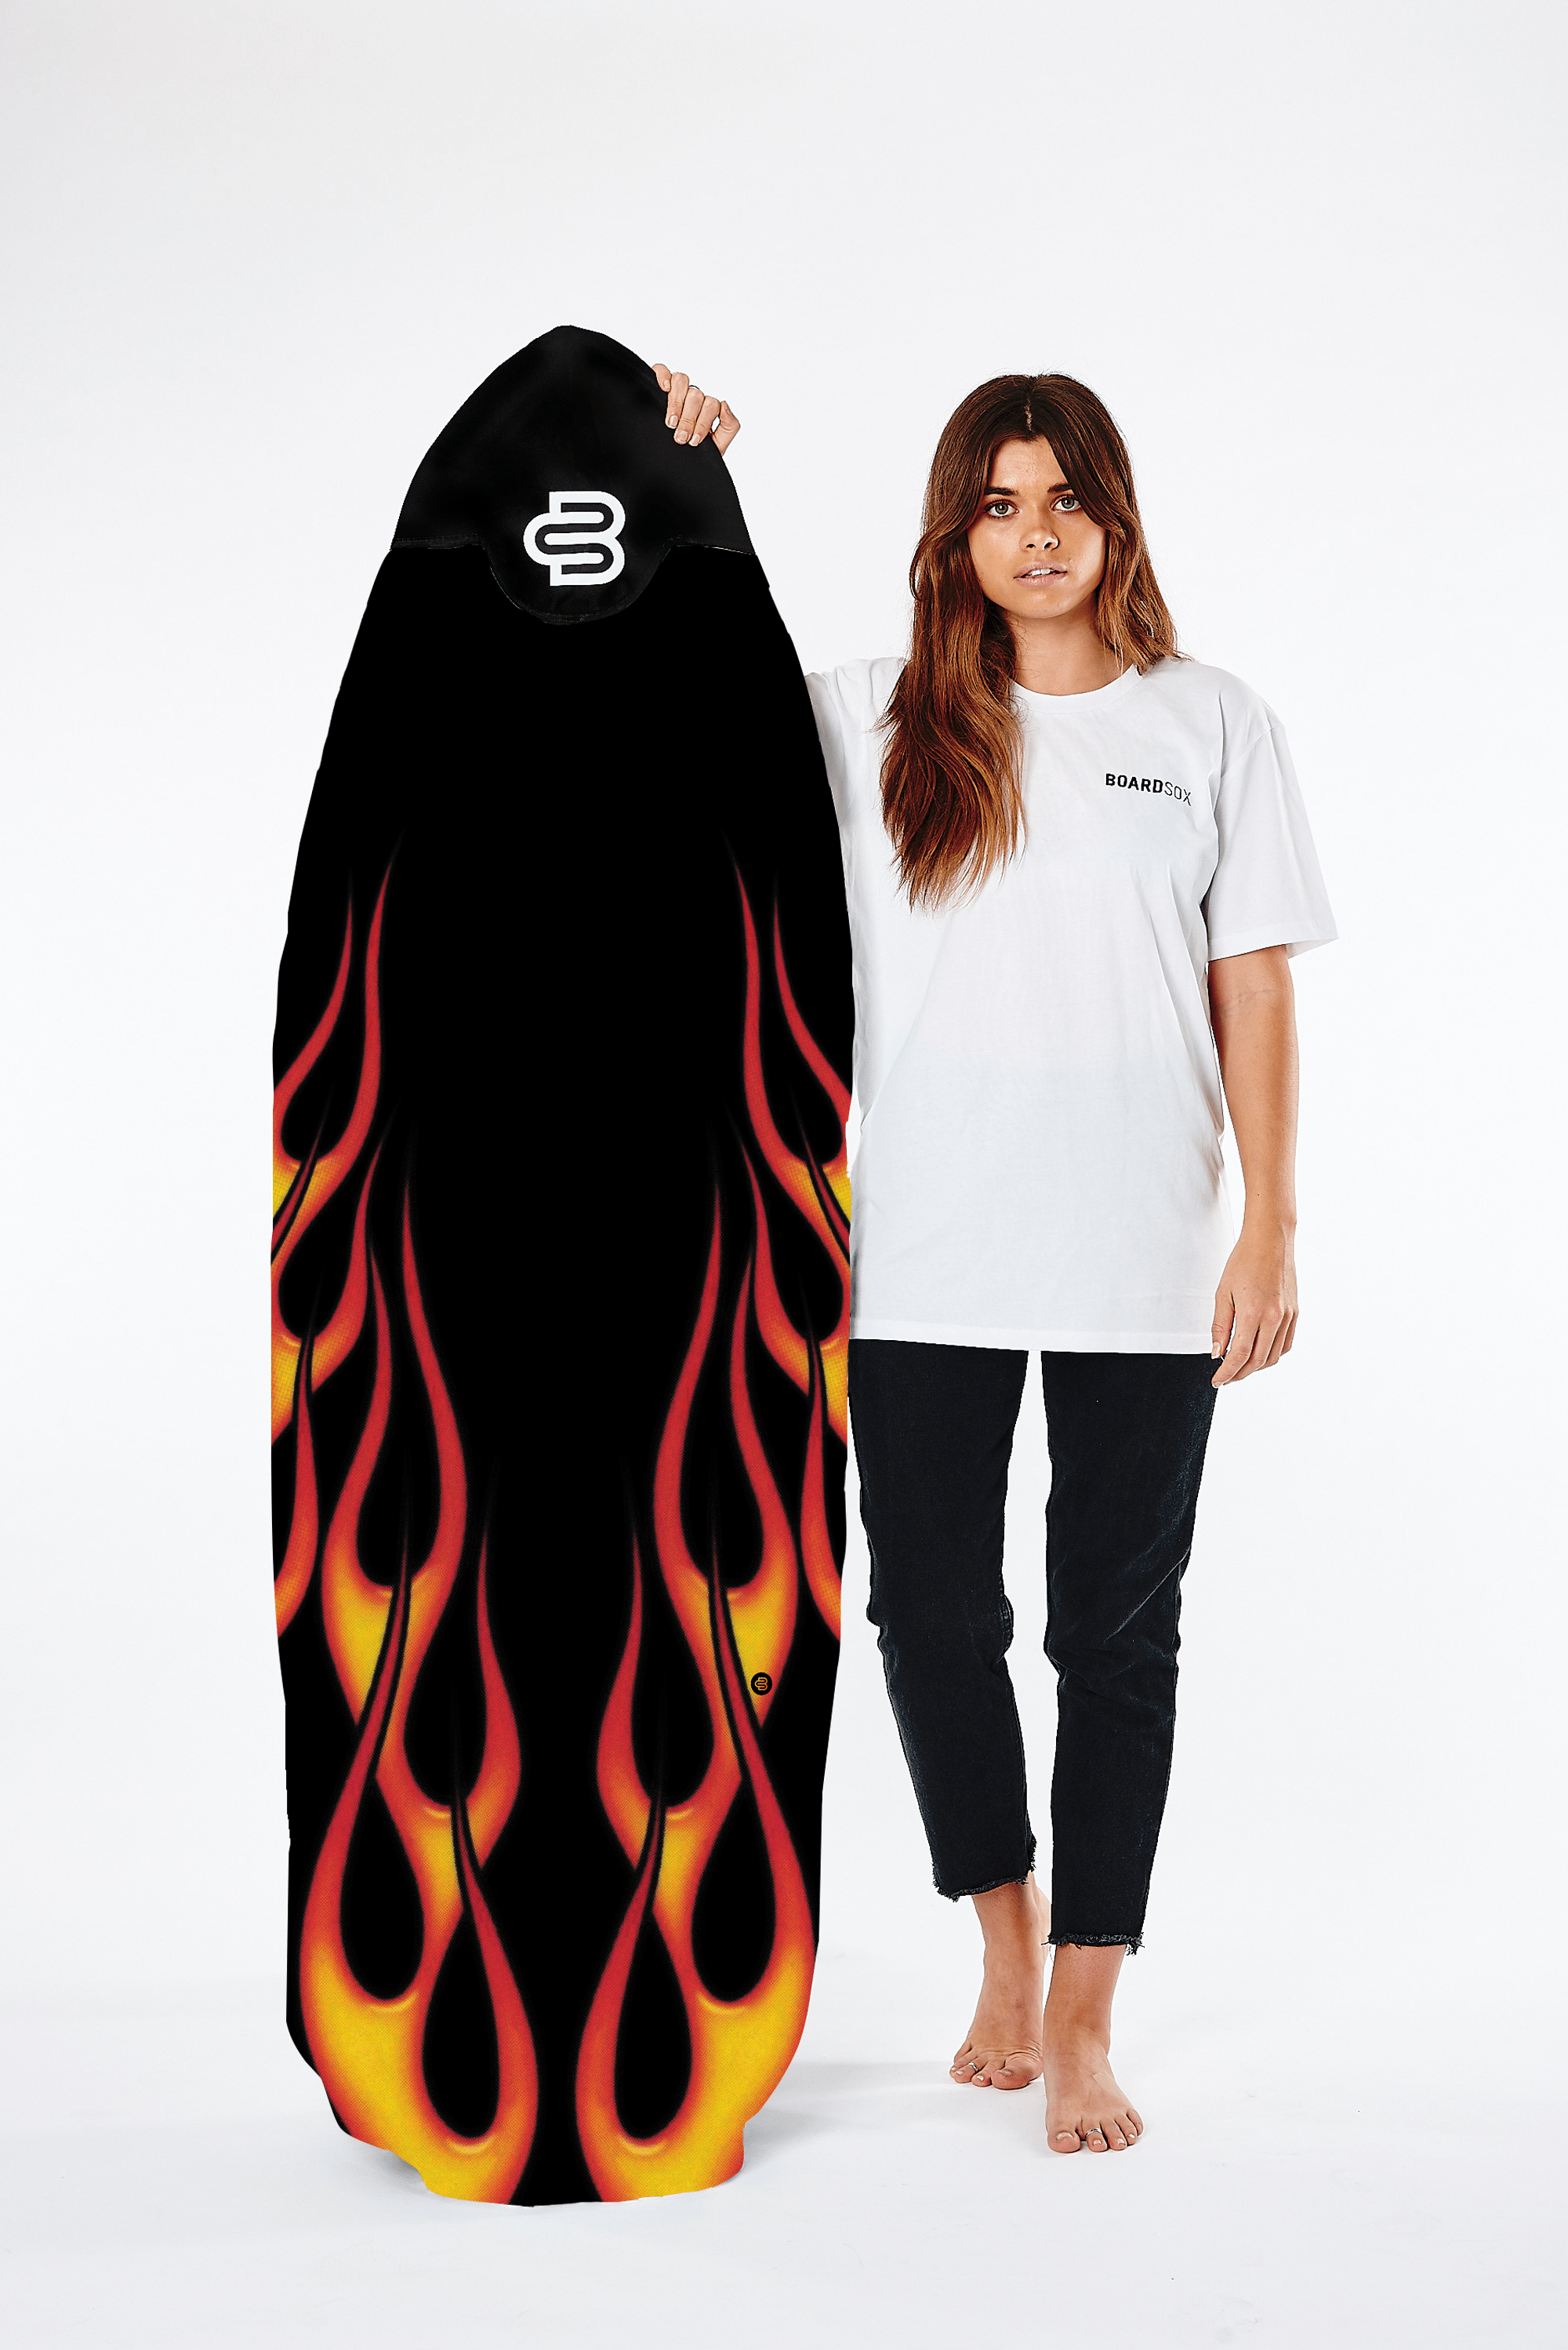 Flames ♻️ rPET Recycled Boardsox® Fun/Hybrid Surfboard Cover - BOARDSOX® AustraliaBoardSox Surfboard Cover